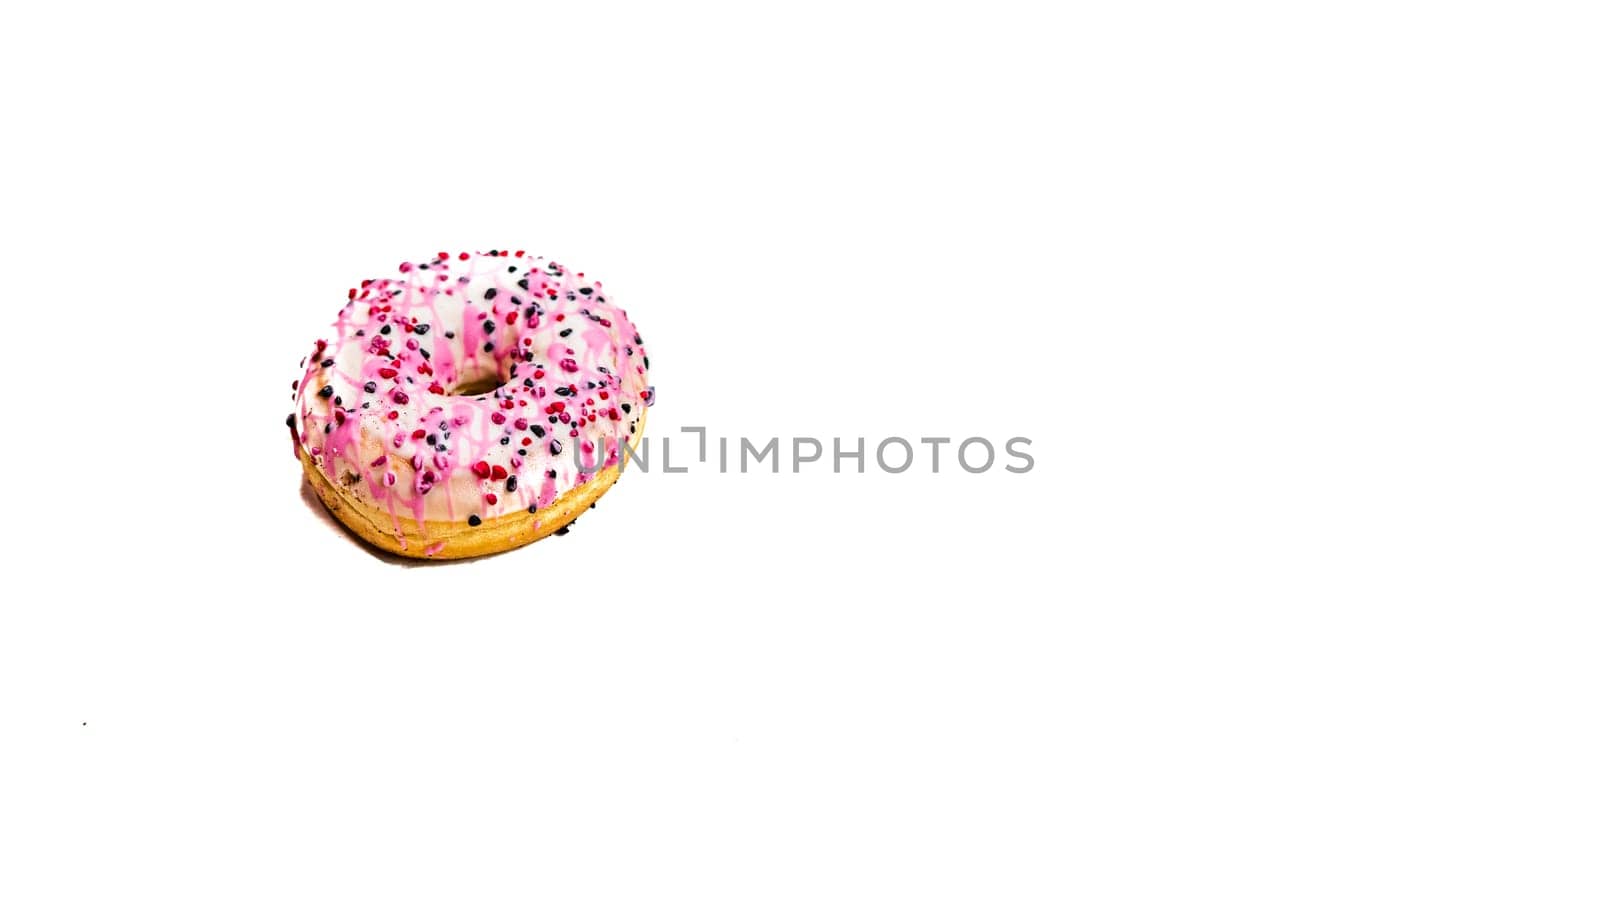 Colorful donut isolated on white. Sweet icing sugar food with glazed sprinkles, doughnut with frosting. Top view with copy space